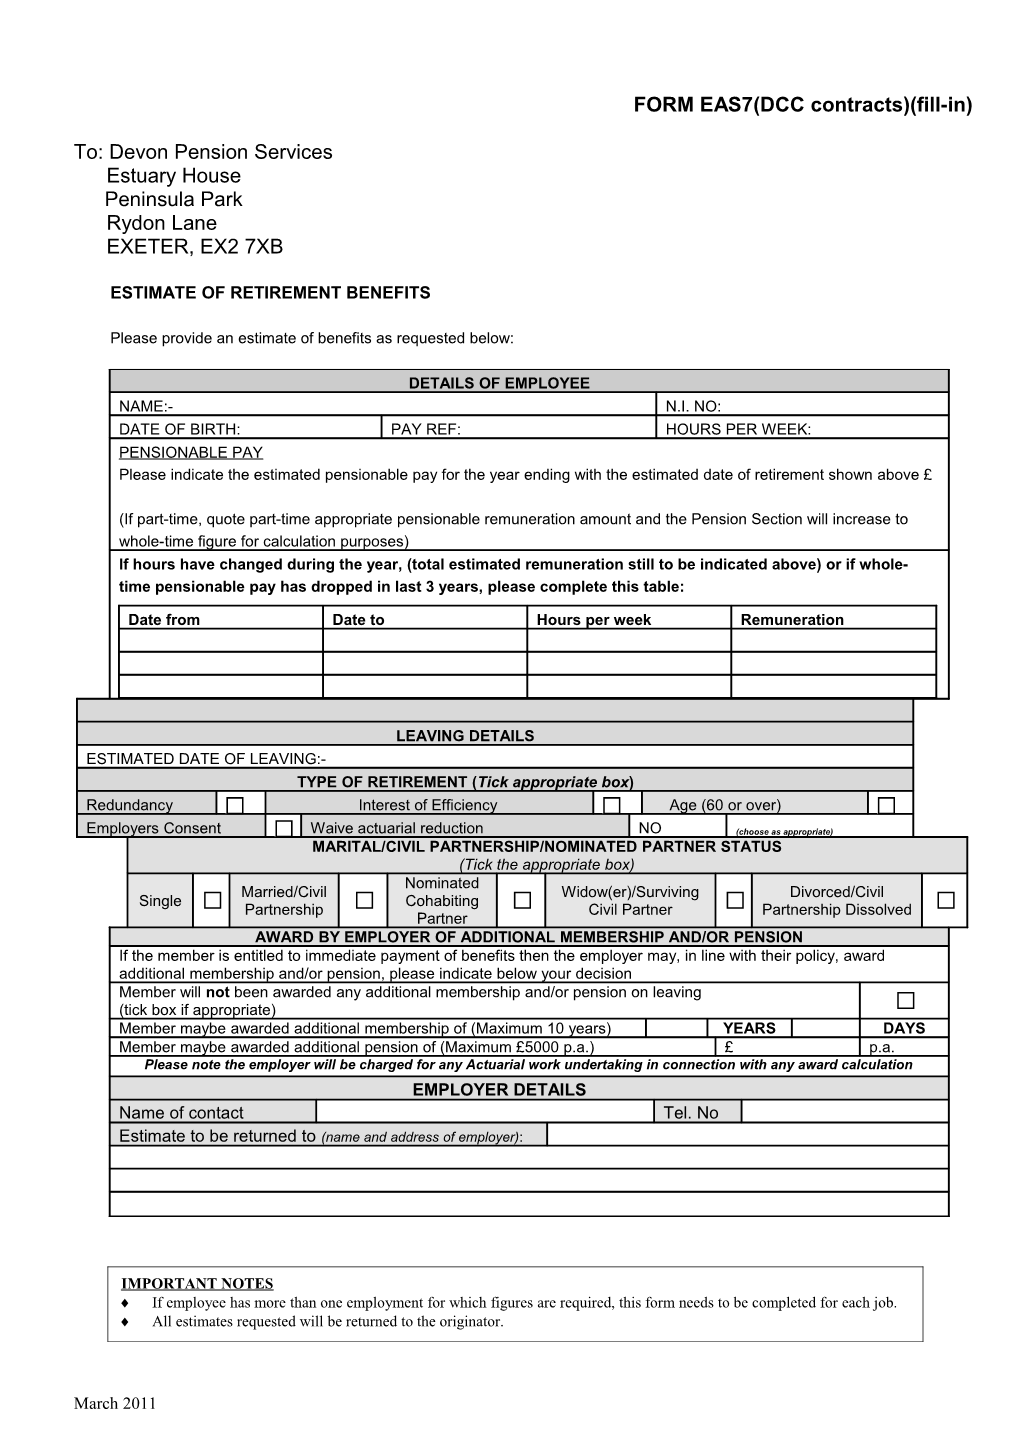 FORM EAS7(DCC Contracts)(Fill-In)